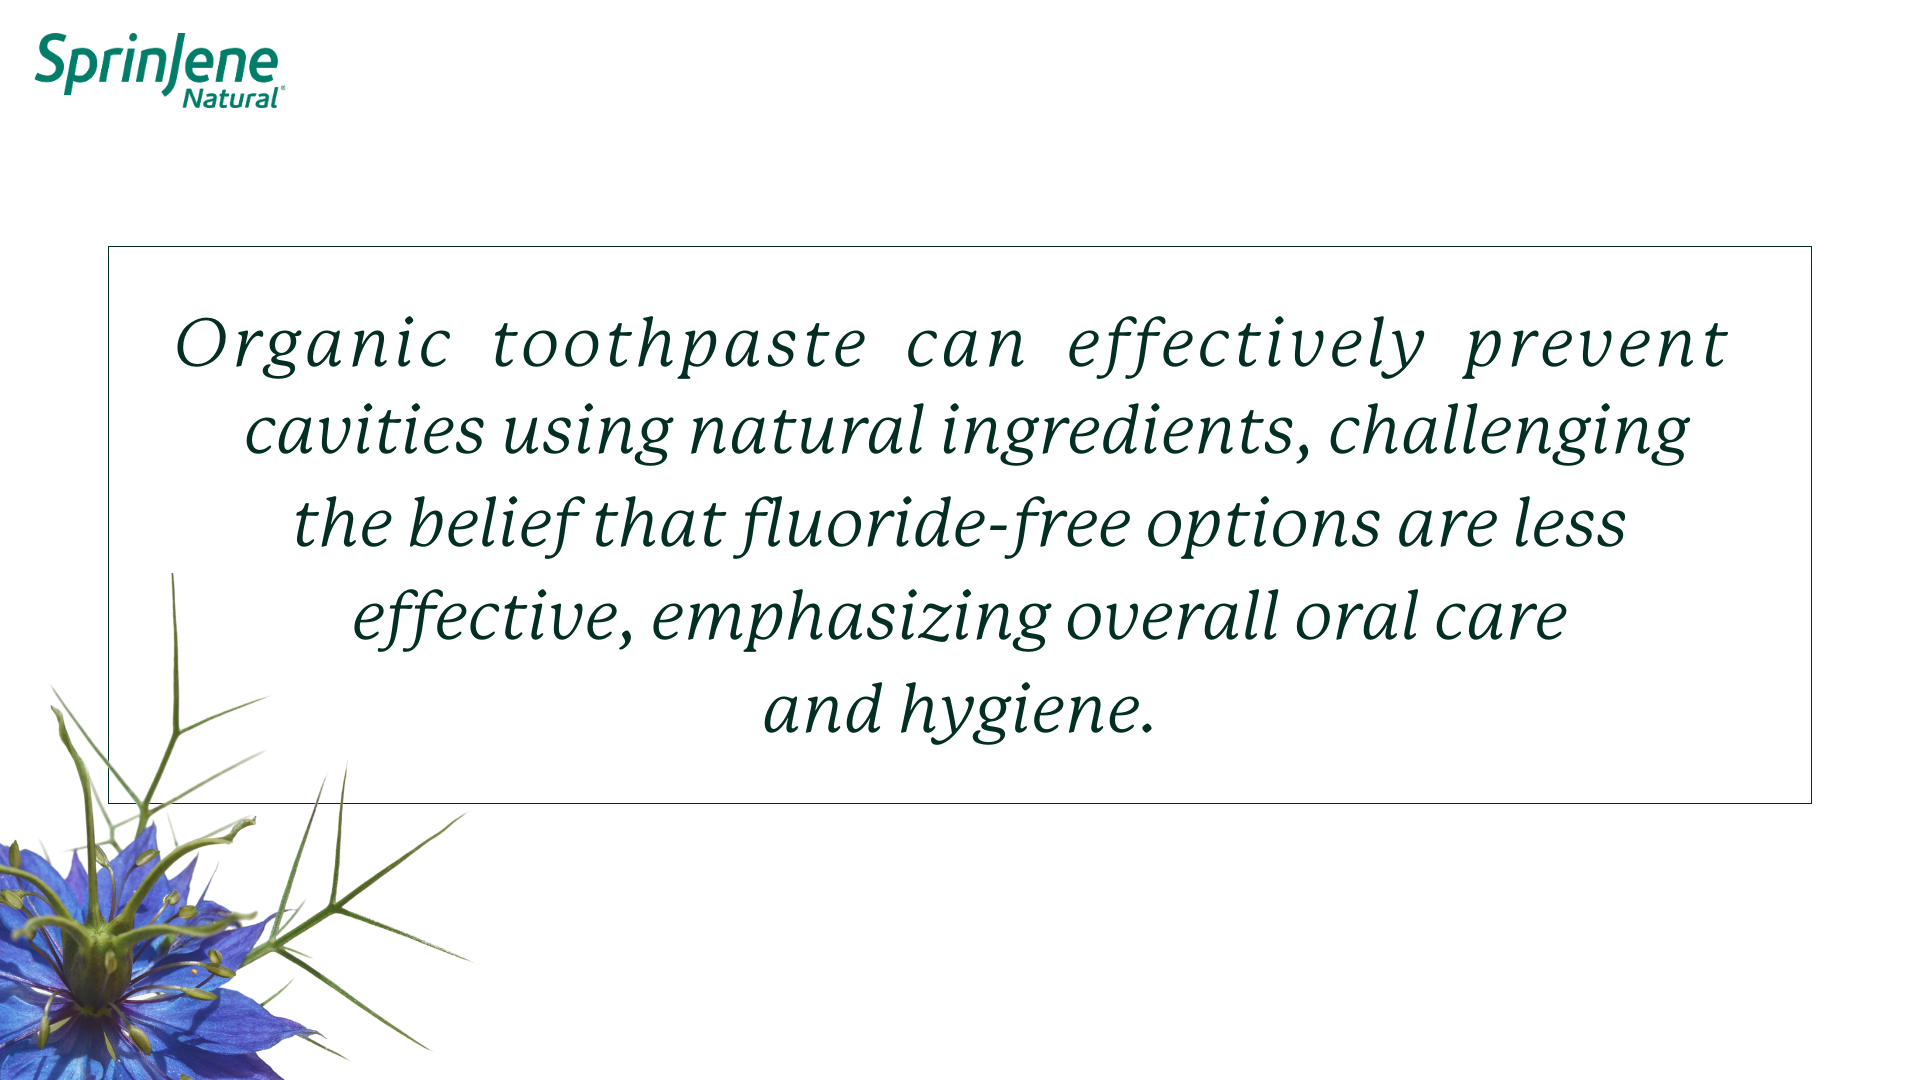 Organic toothpaste can effectively prevent cavities using natural ingredients, challenging the belief that fluoride-free options are less effective, emphasizing overall oral care and hygiene.